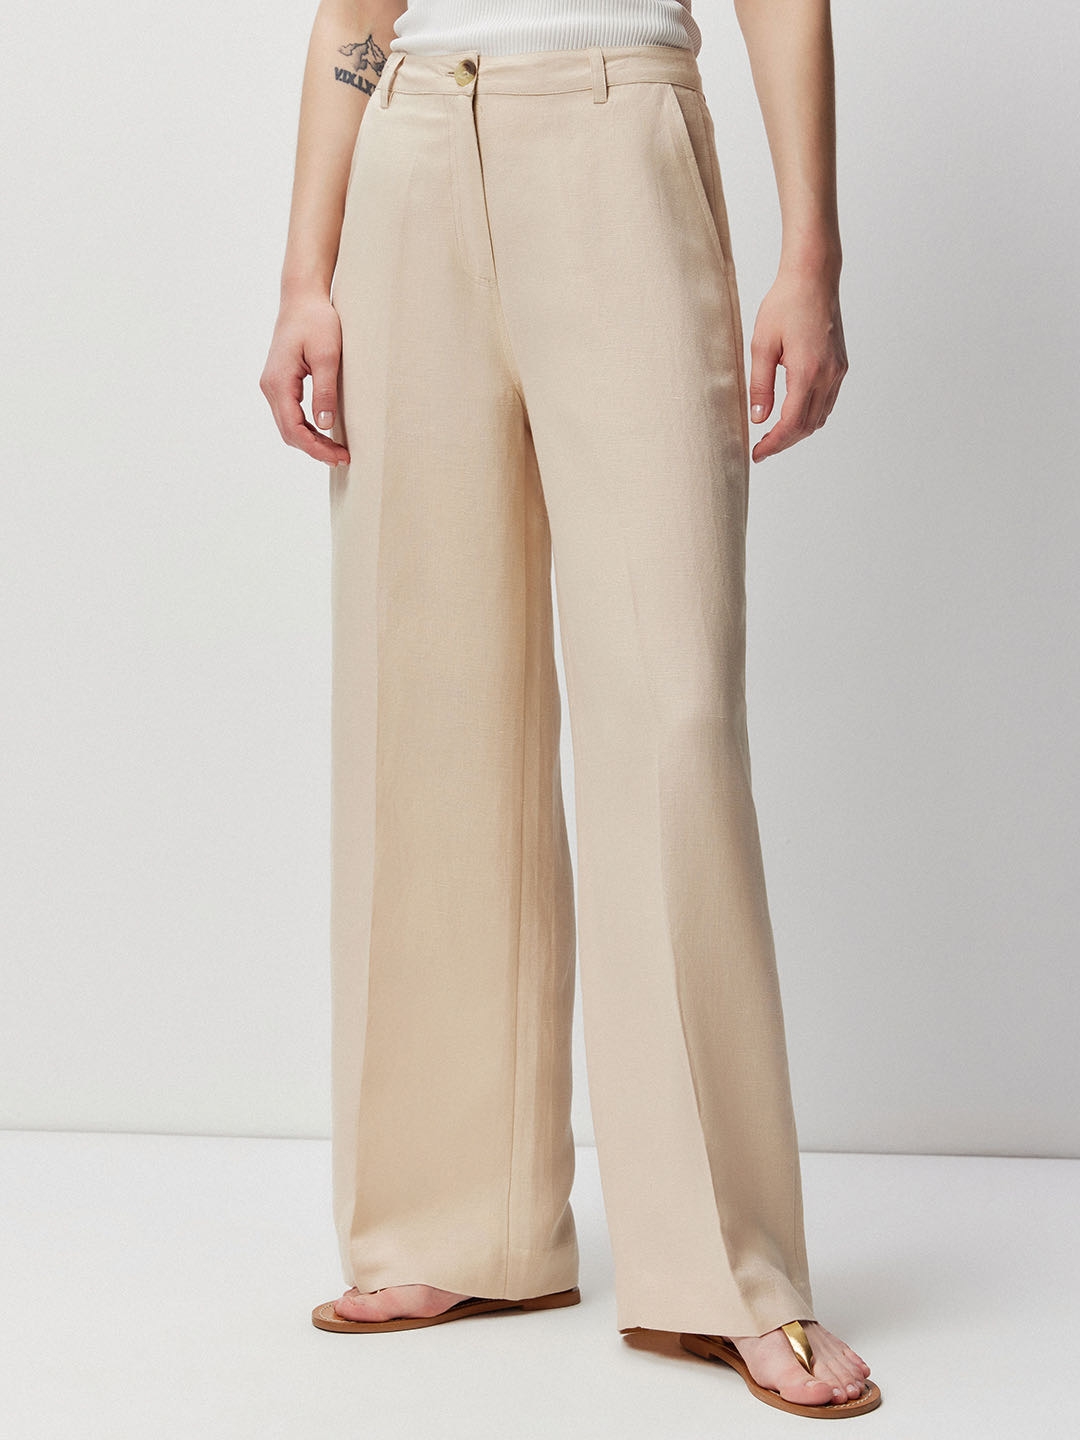 Buy COVER STORY Brown Womens 2 Pocket Solid Wide Leg Pants | Shoppers Stop